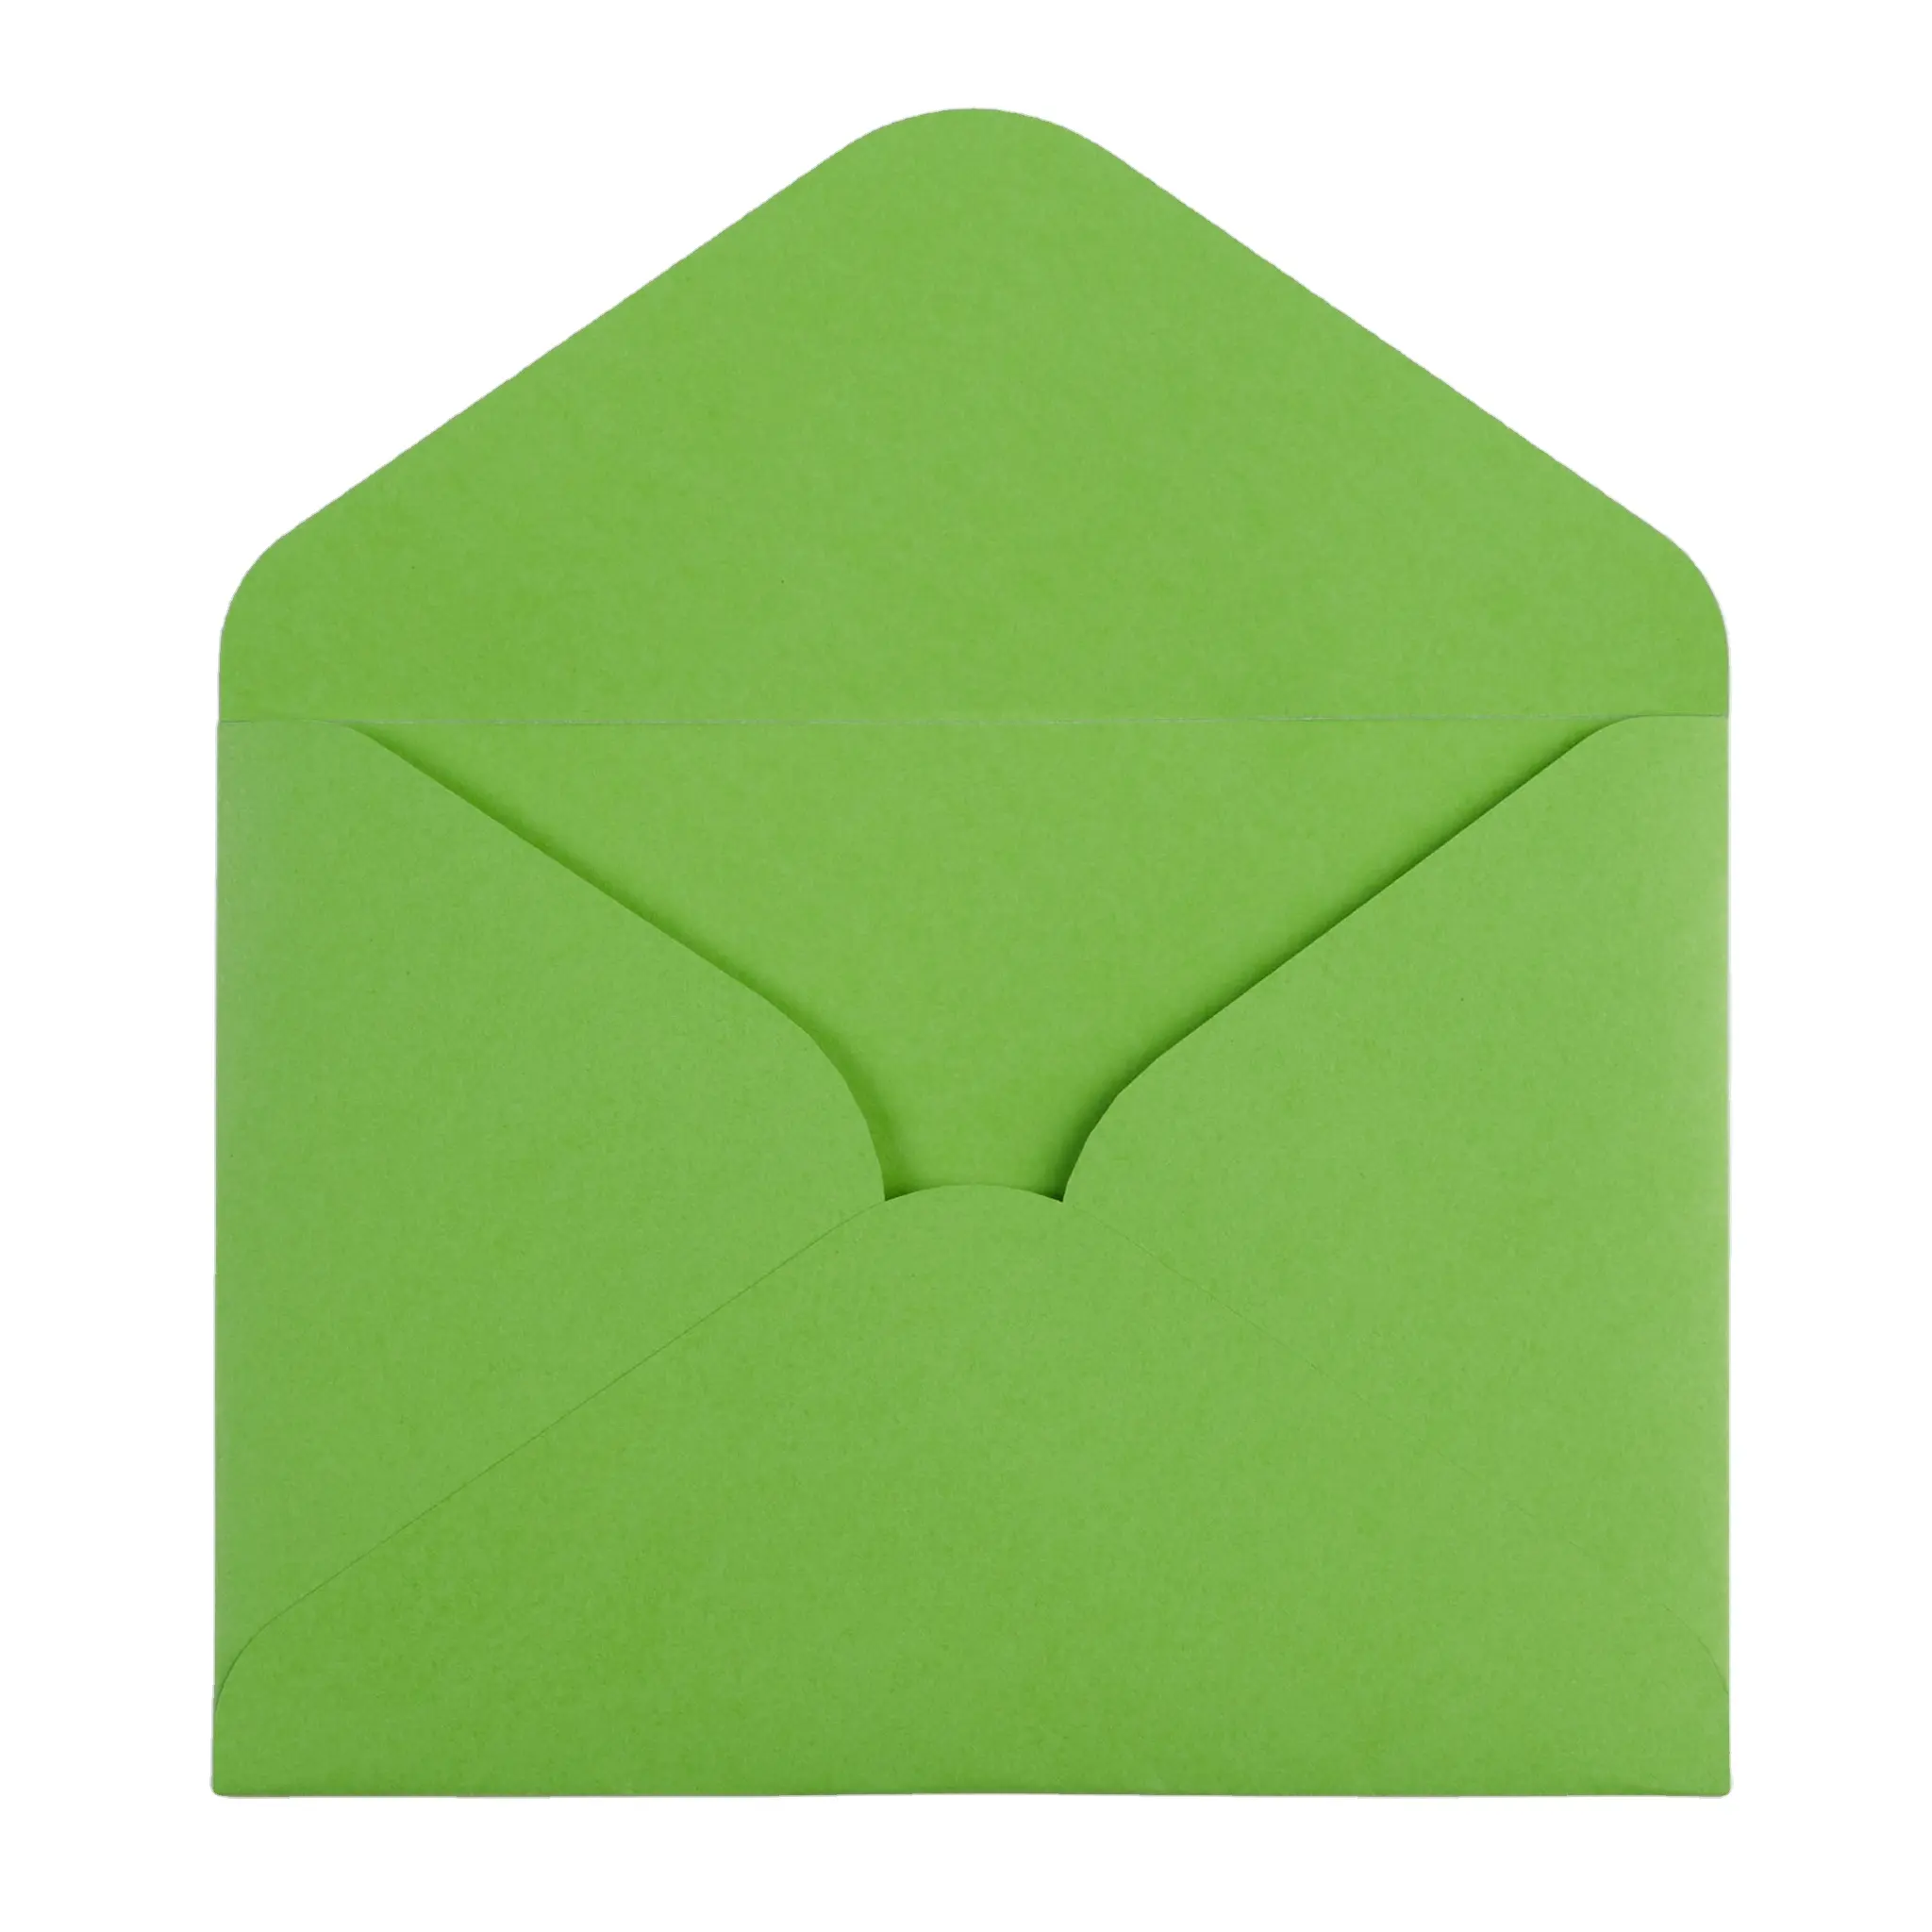 Card And Envelope Flat Flap Good Price Wide Application Using For Many Industries Iso Customized Packing From Vietnam